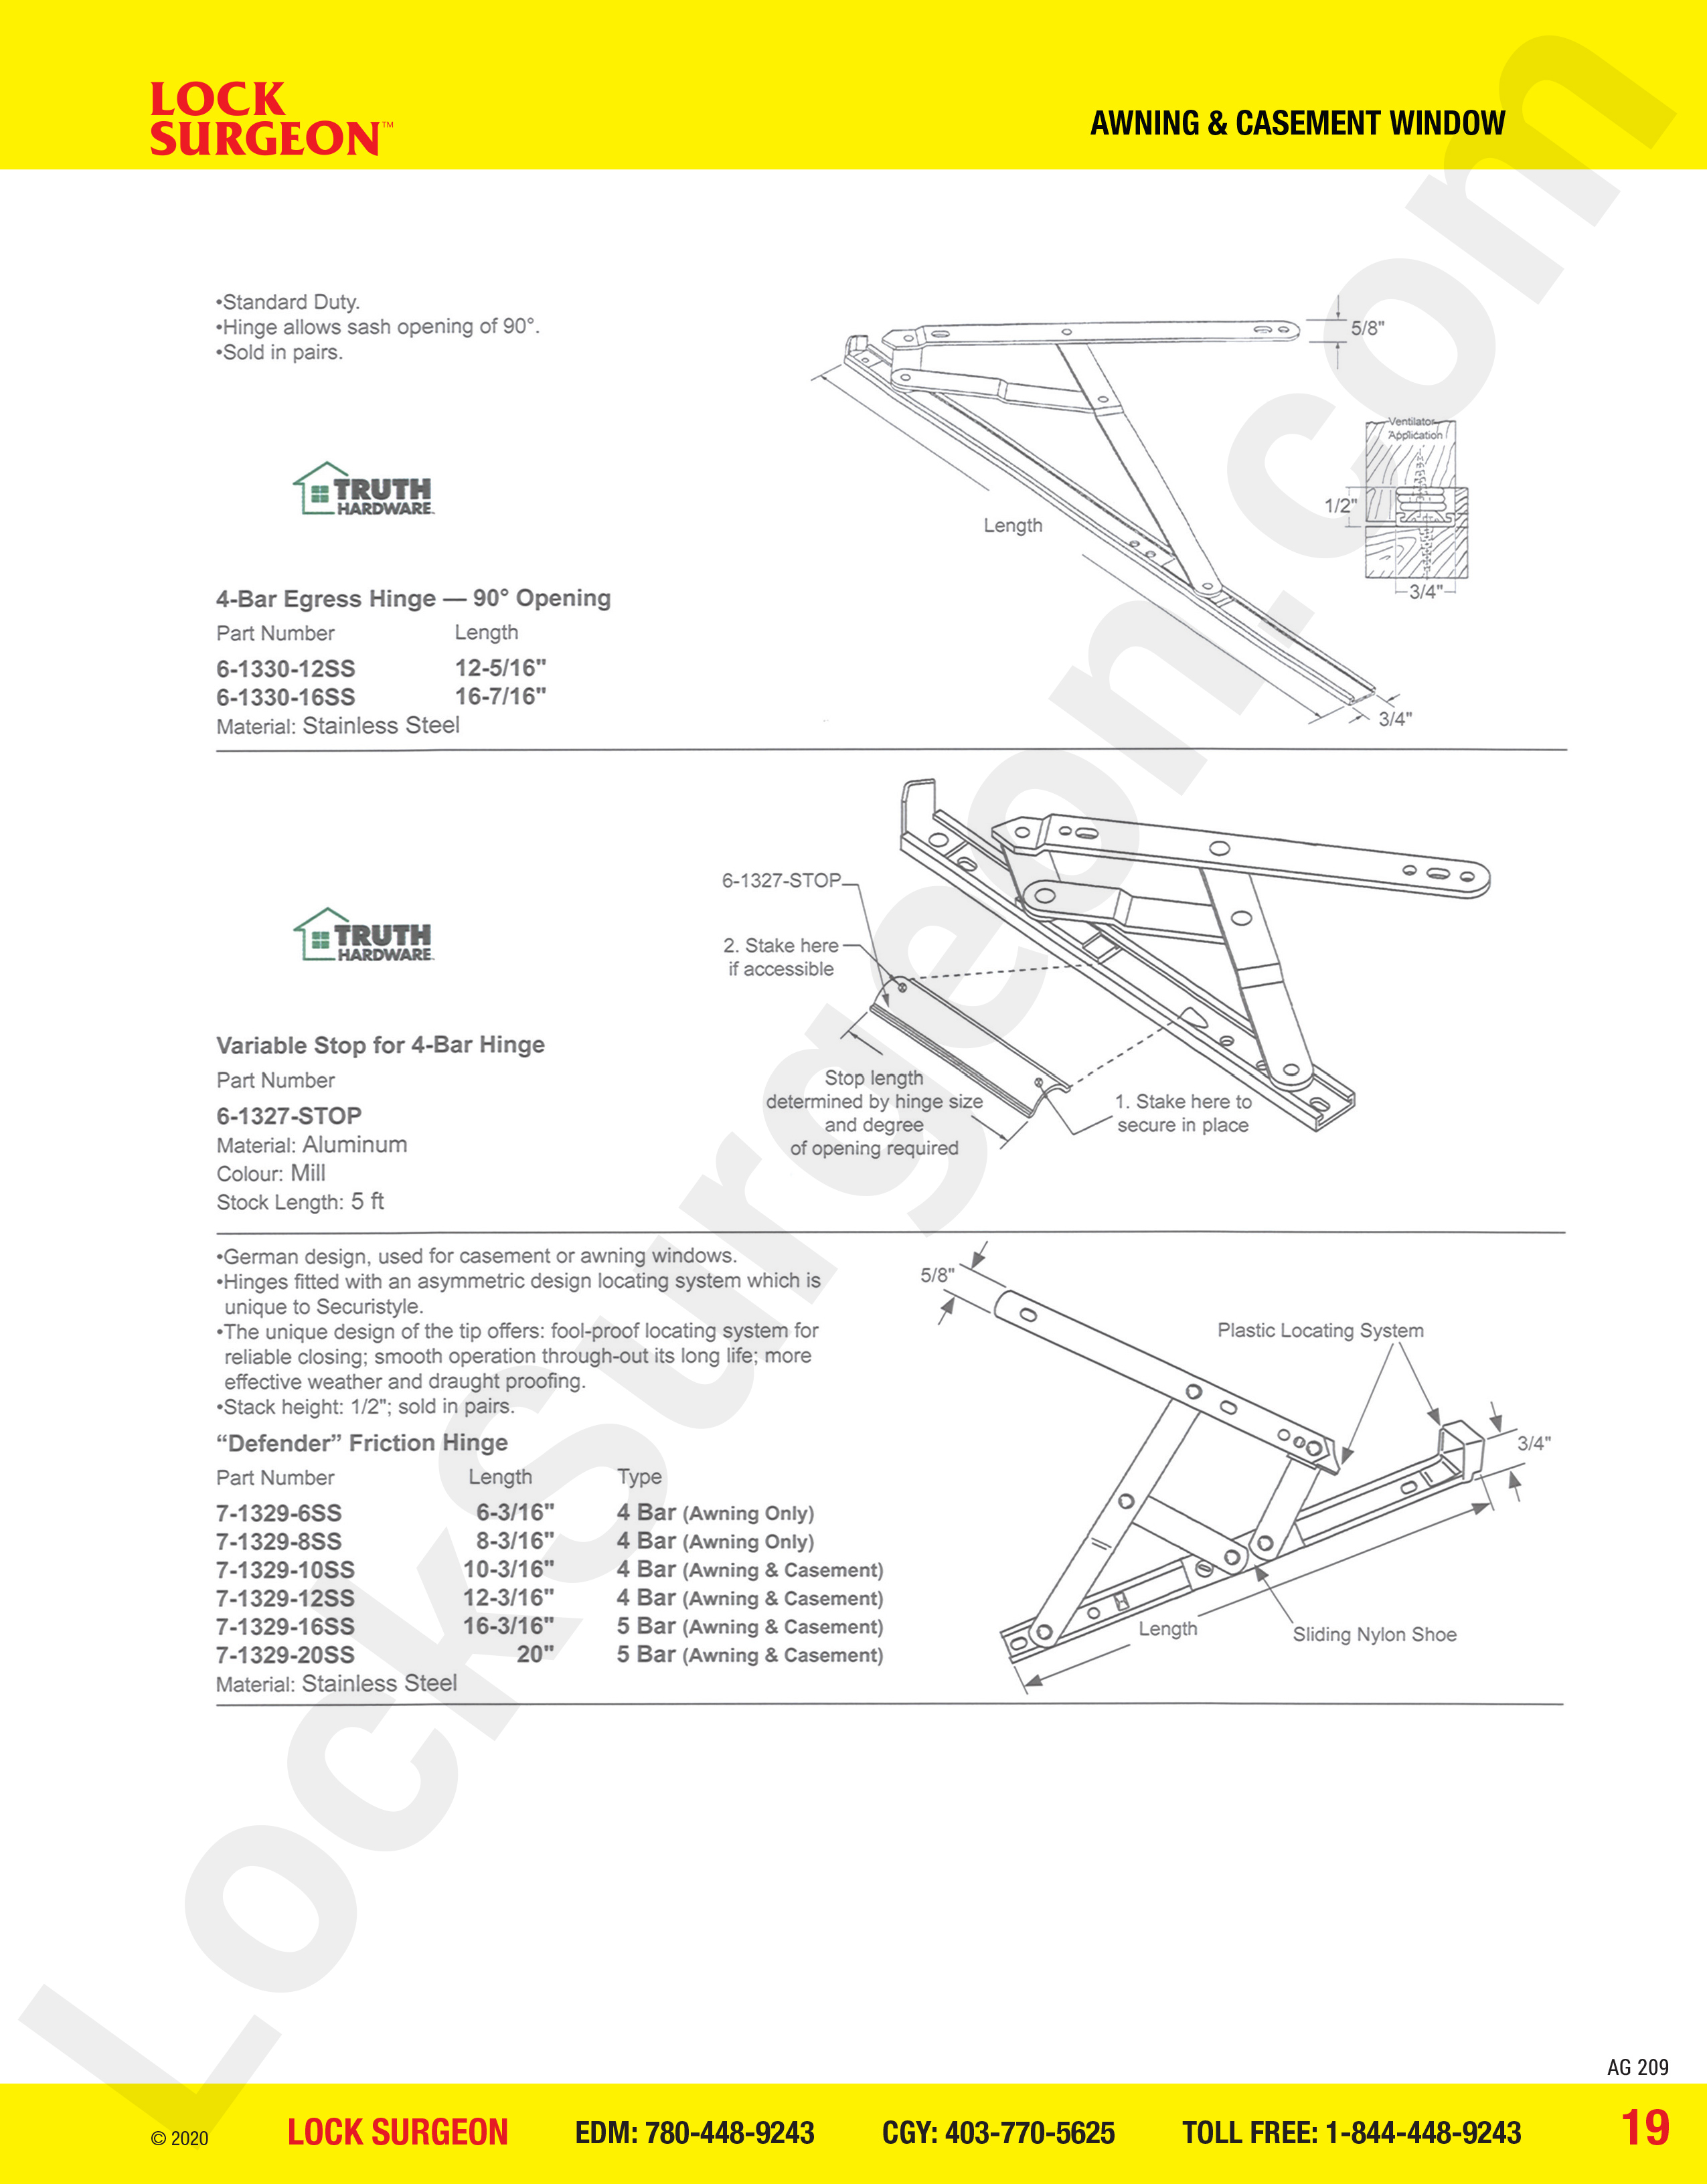 awning and casement window parts for hinges.